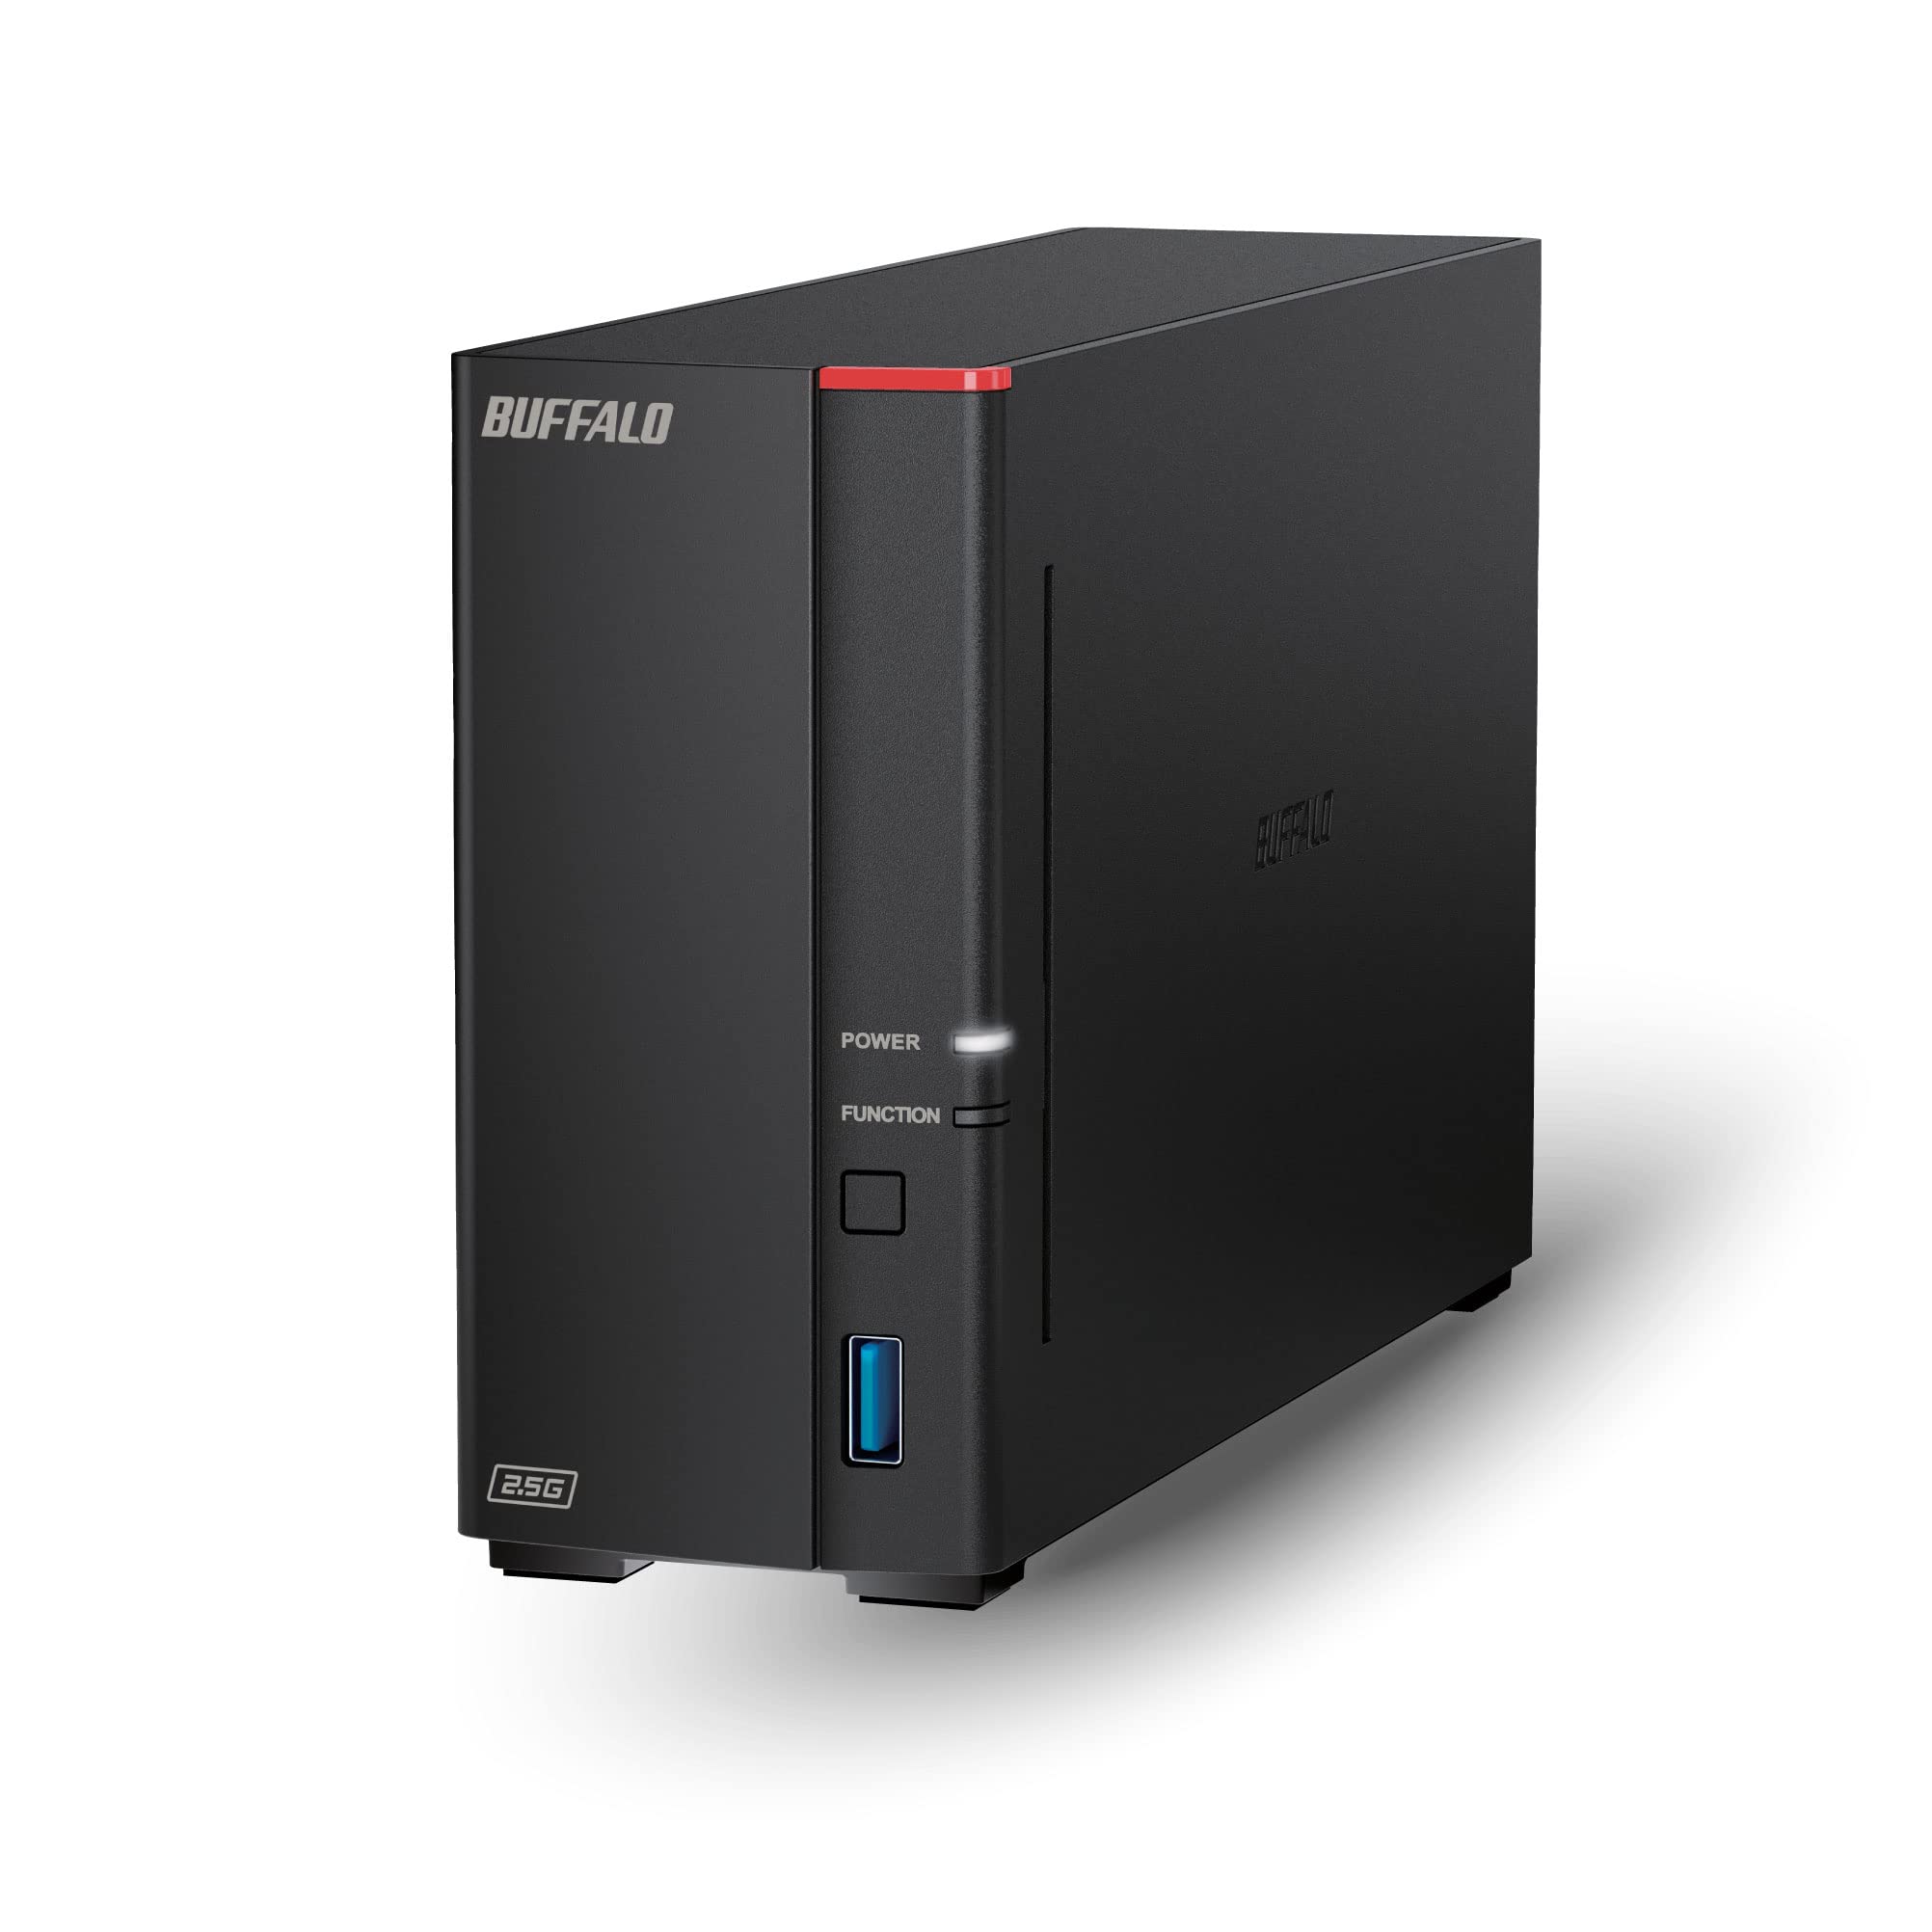 BUFFALO LinkStation 710 2TB 1-Bay NAS Network Attached Storage with HDD Hard Drives Included NAS Storage That Works as Home Cloud or Network Storage Device for Home